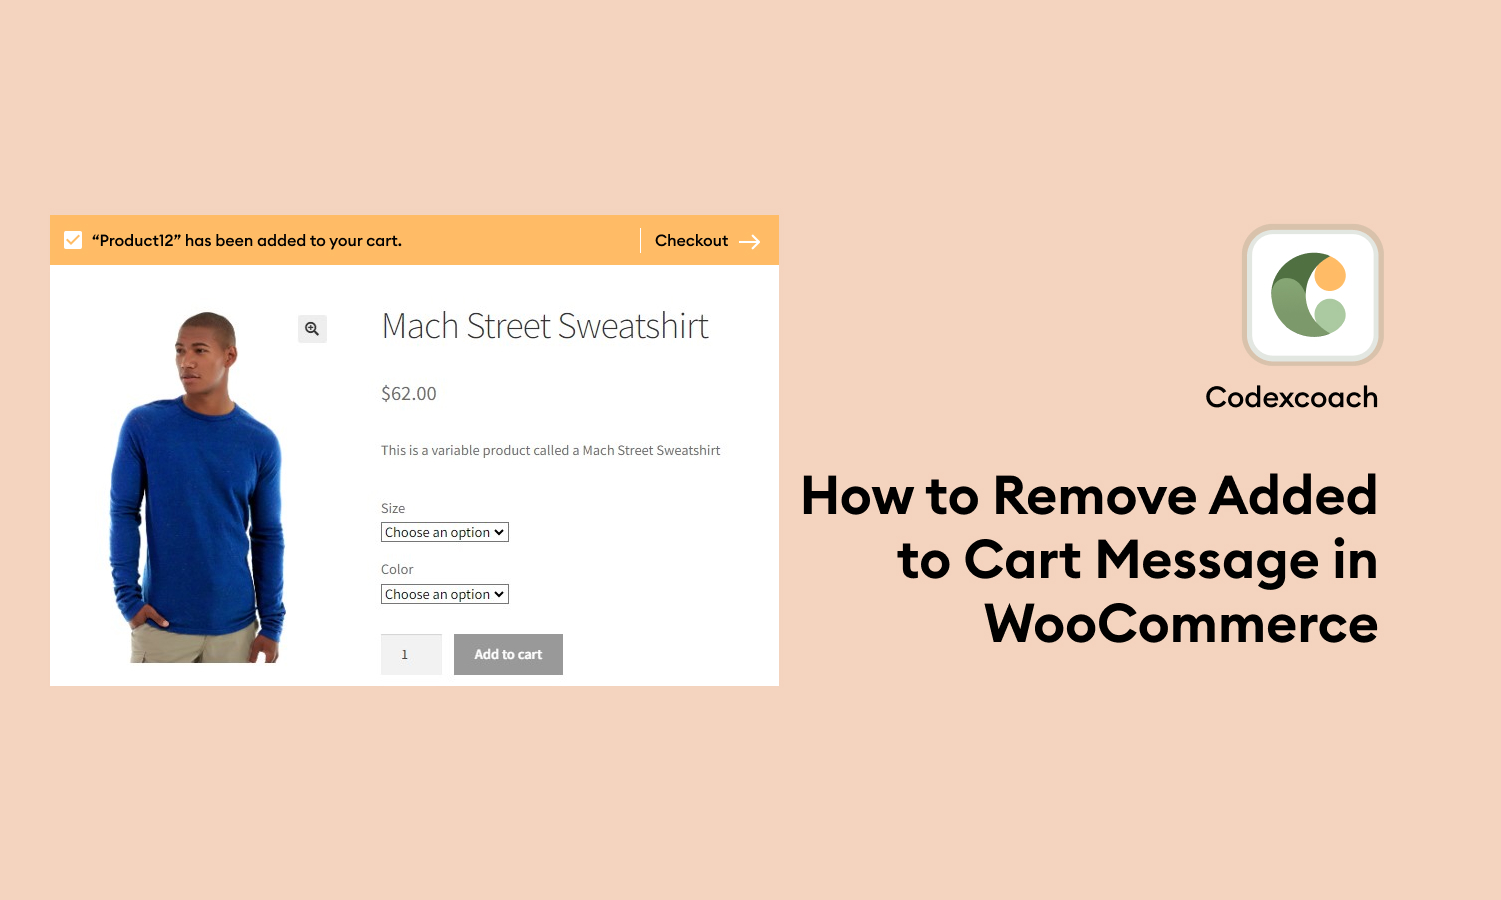 How to Remove Added to Cart Message in WooCommerce